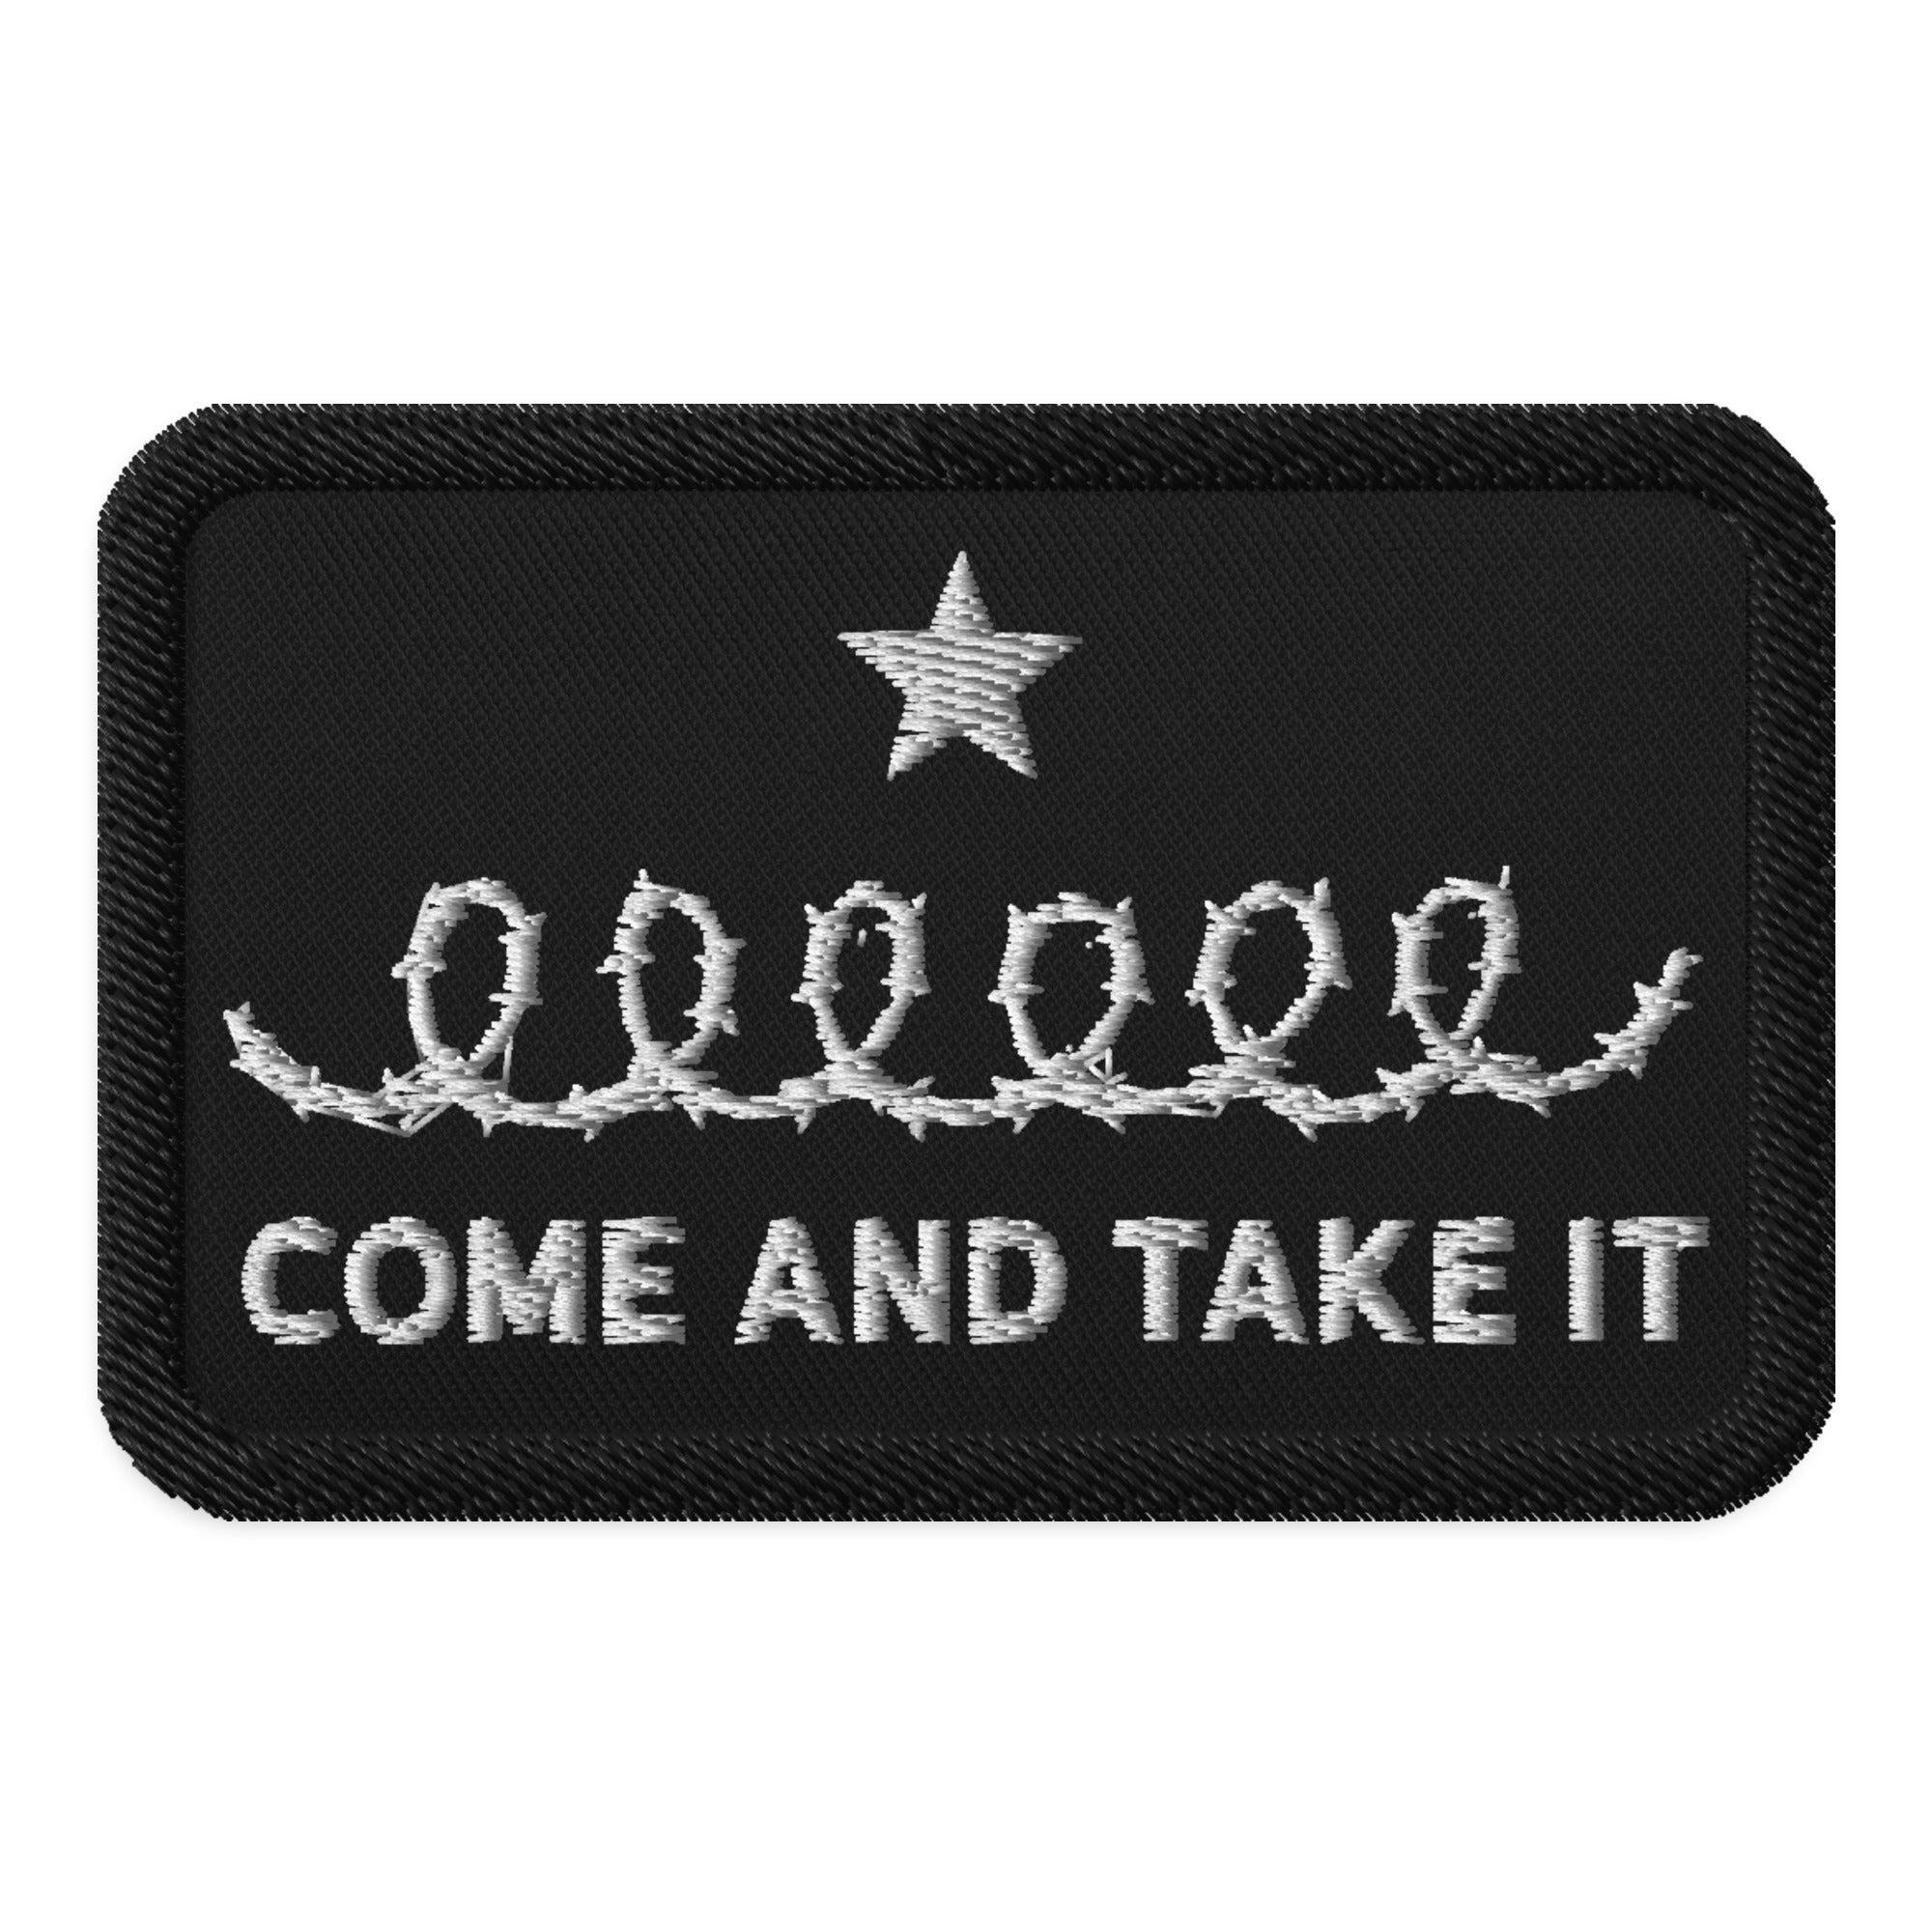 Come and Take It Barbed Wire Lone Star Rebellion Morale Patch